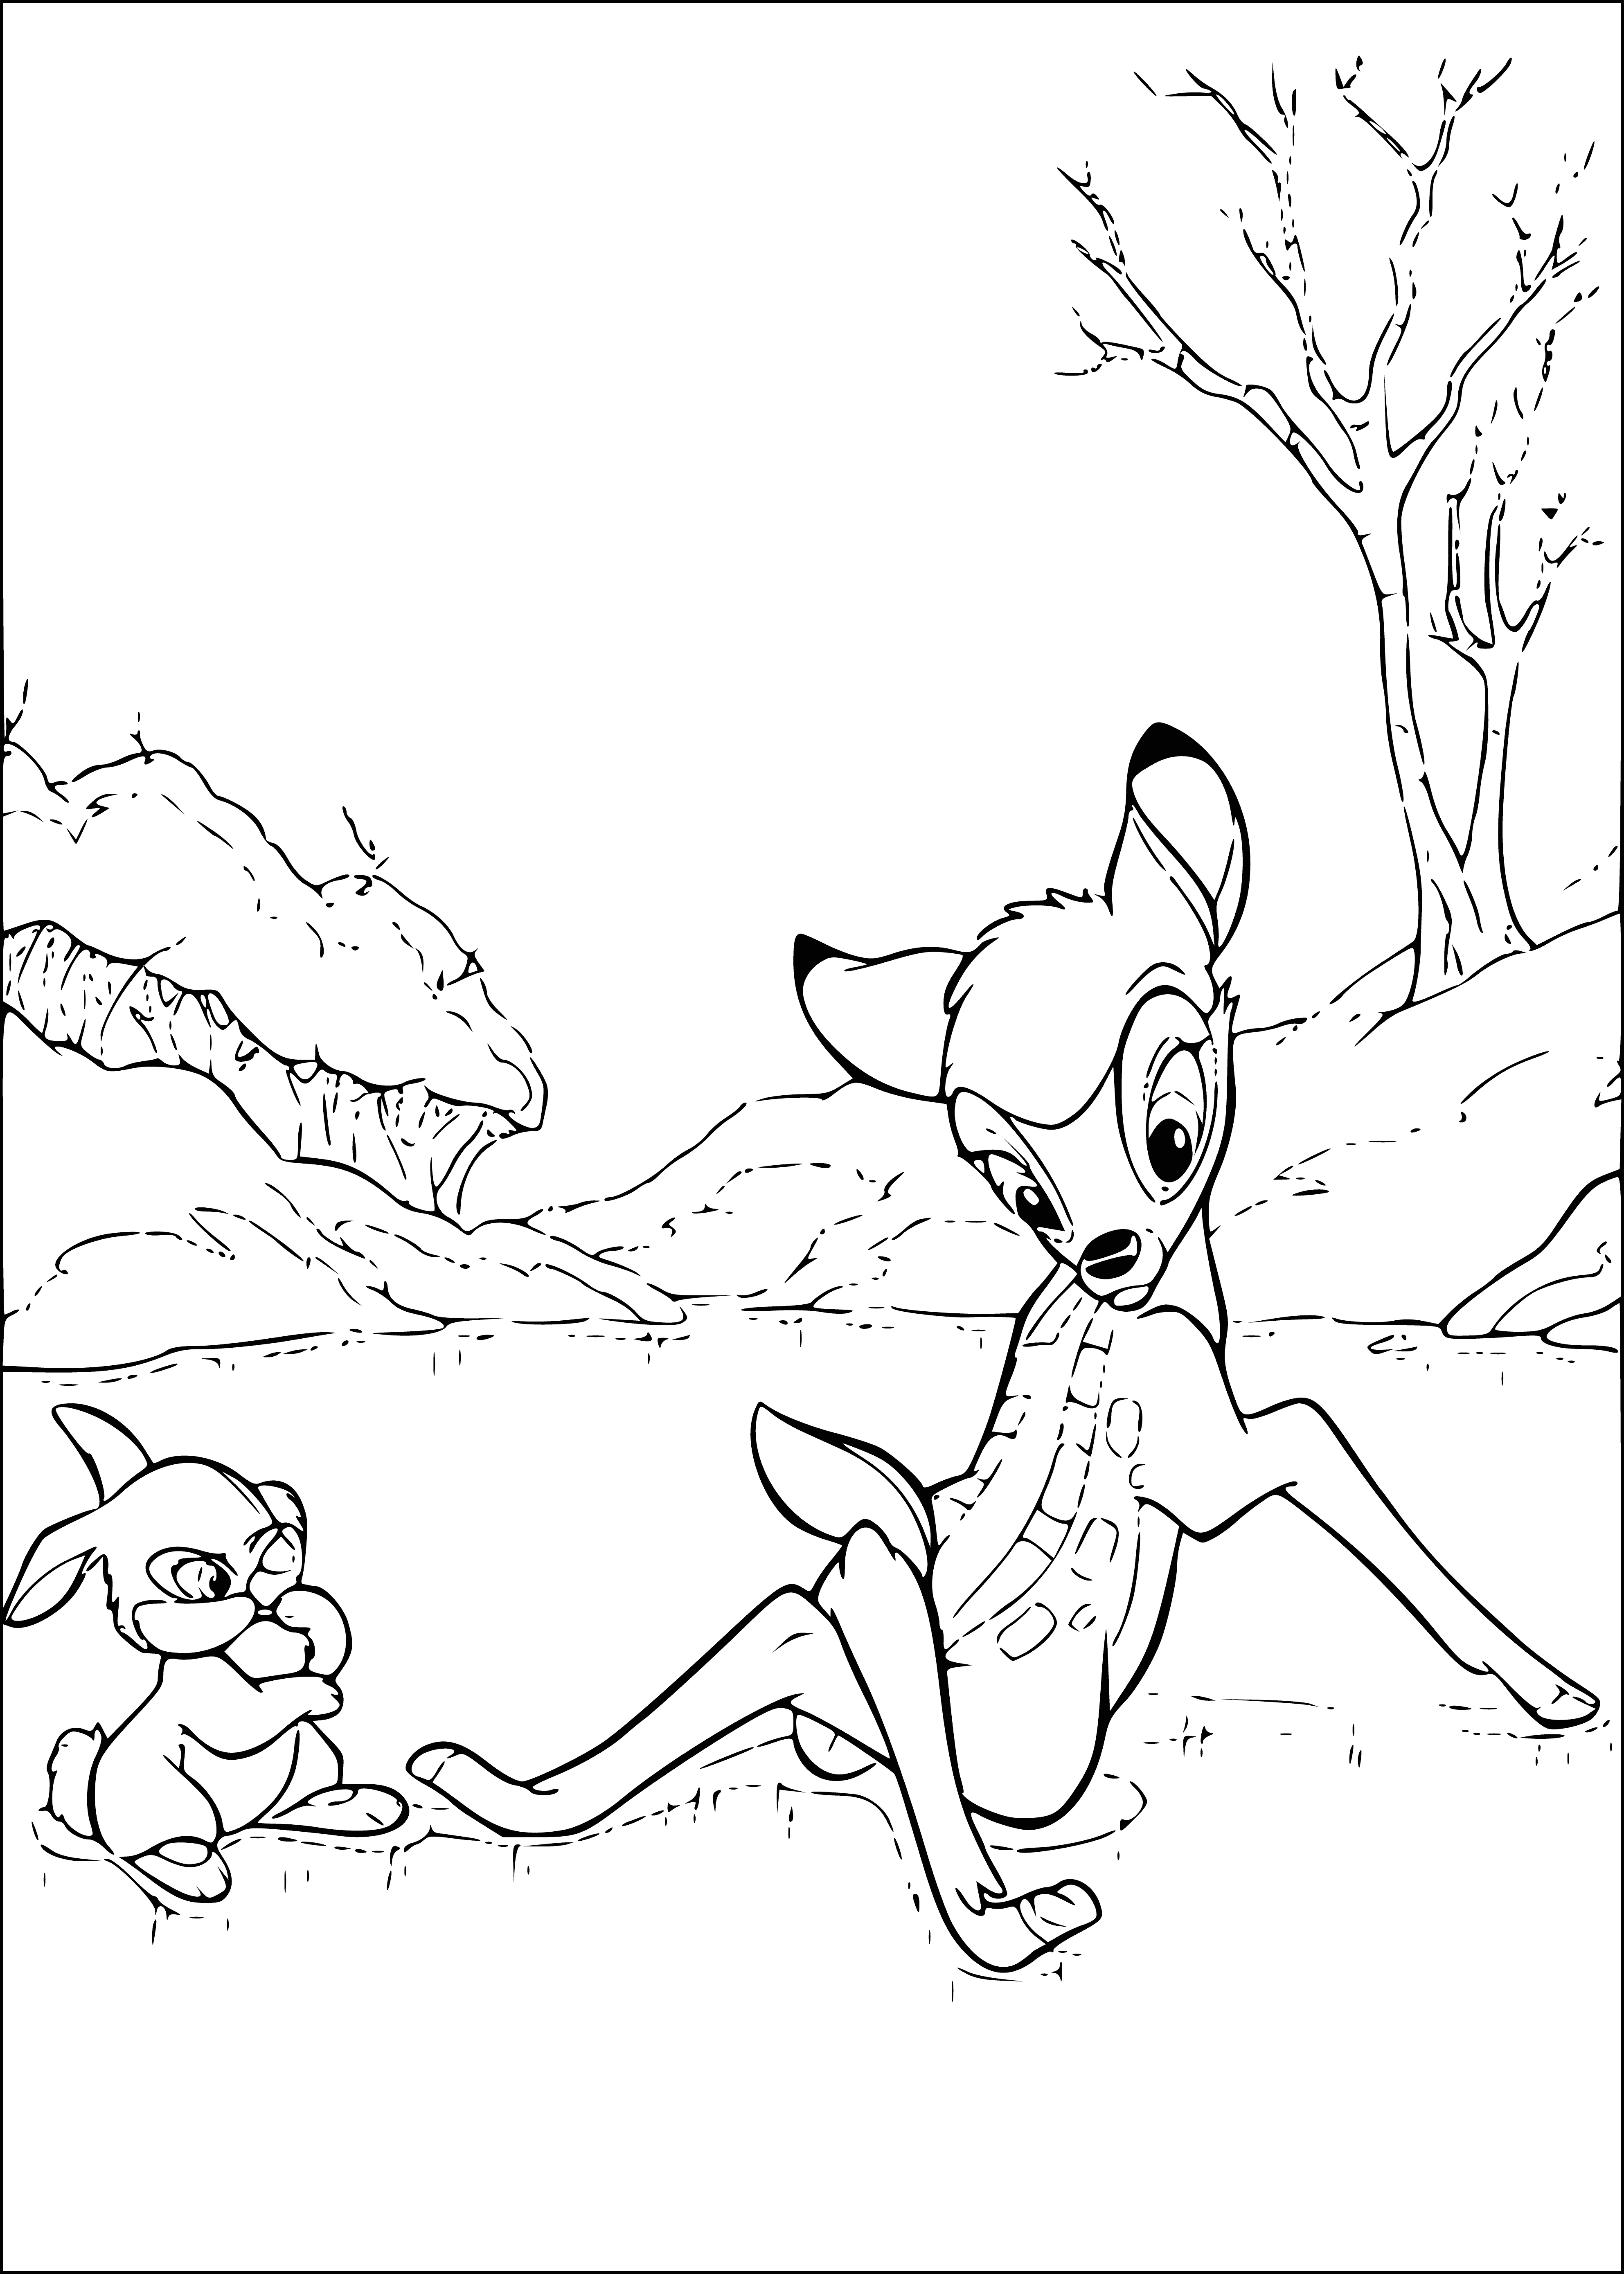 Hare and Bambi on ice coloring page